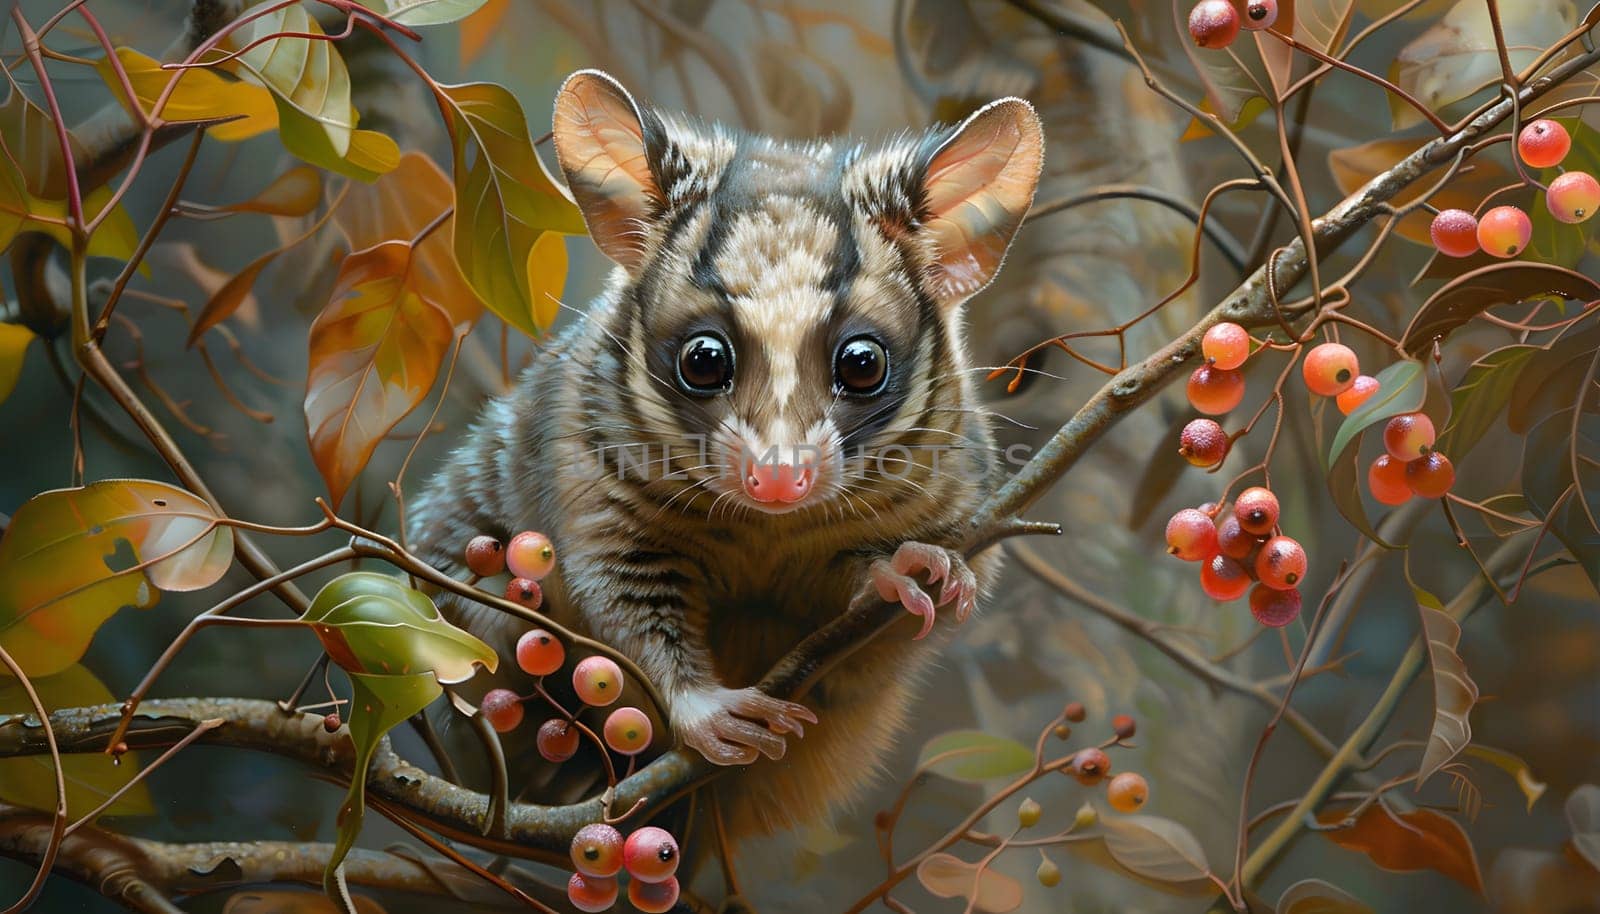 A terrestrial animal with fur is perched on a tree branch surrounded by berries. Its whiskers twitch as it gazes at the terrestrial plants below